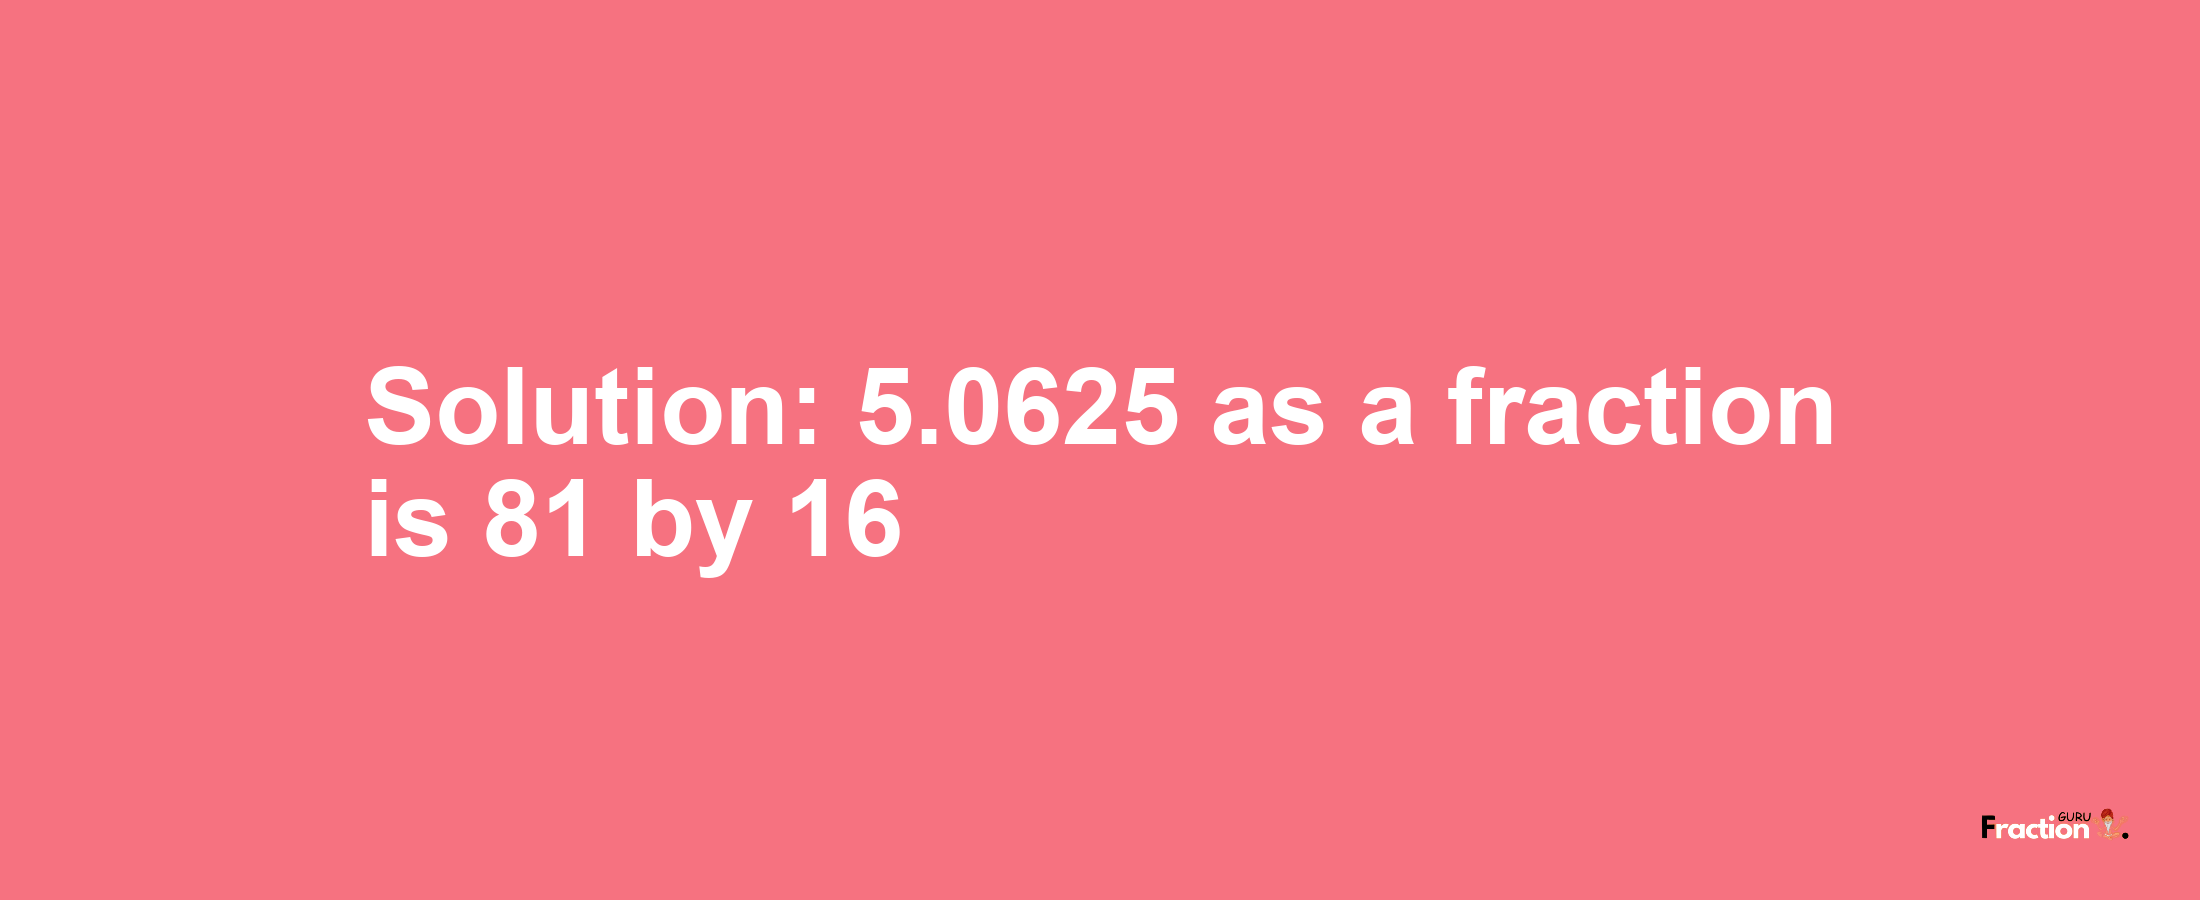 Solution:5.0625 as a fraction is 81/16